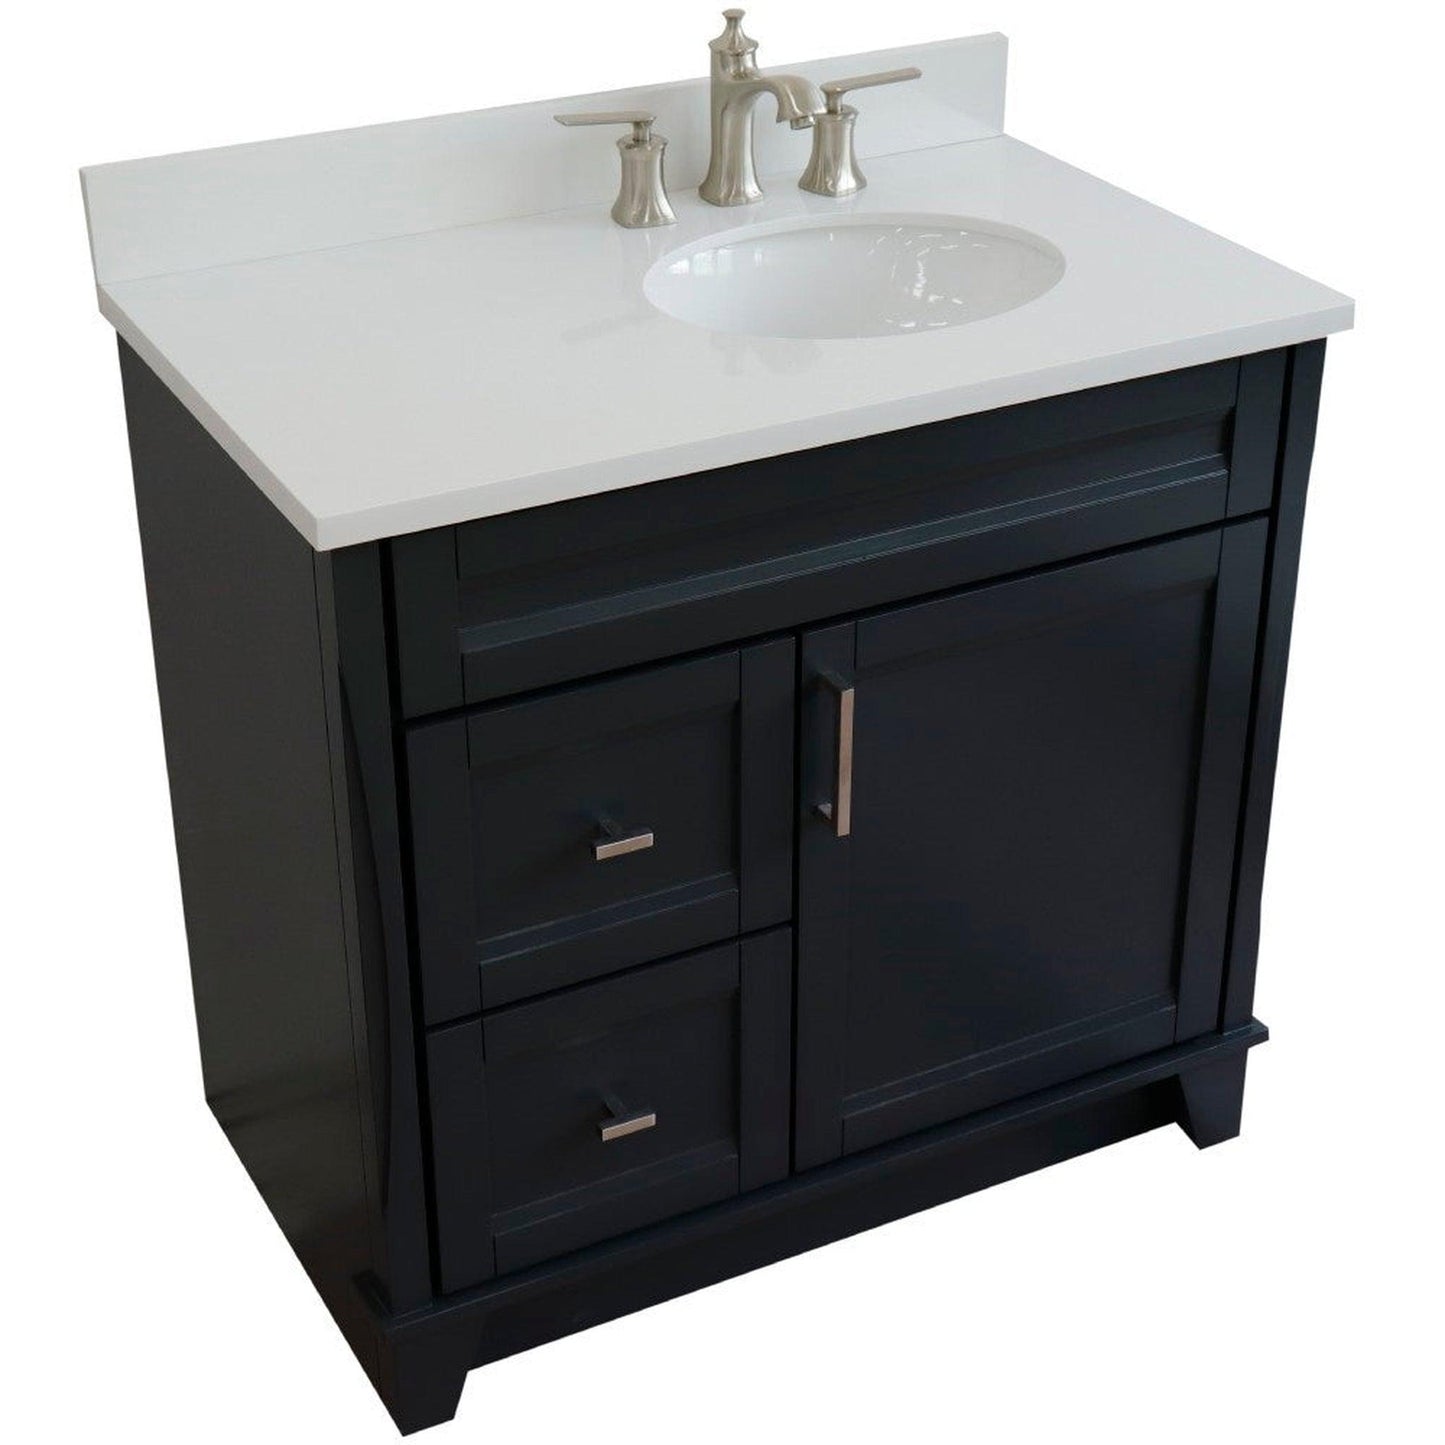 Bellaterra Home Terni 37" 1-Door 2-Drawer Dark Gray Freestanding Vanity Set With Ceramic Right Offset Undermount Oval Sink and White Quartz Top, and Right Door Base